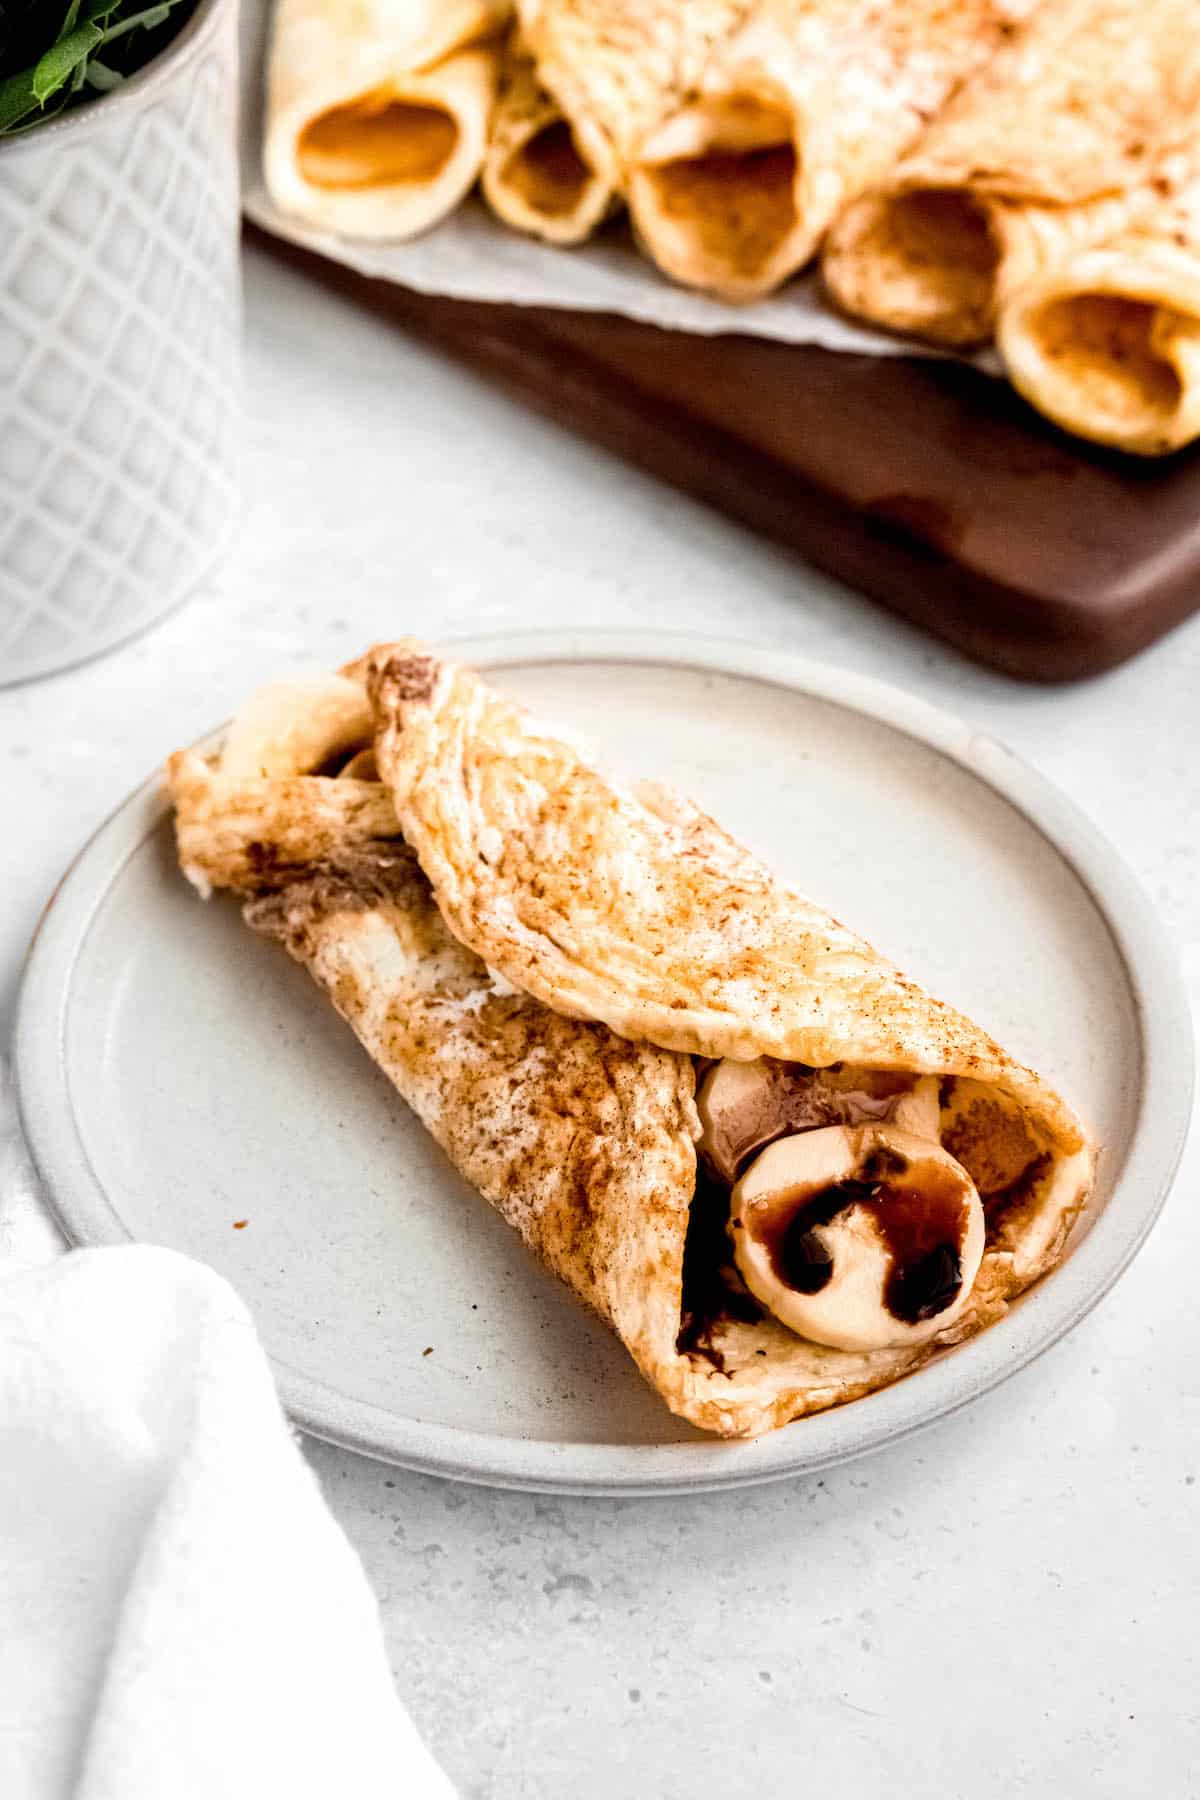 sweet cinnamon flavored egg white wrap rolled around banana and chocolate syrup like a sweet crepe on an earthenware plate.